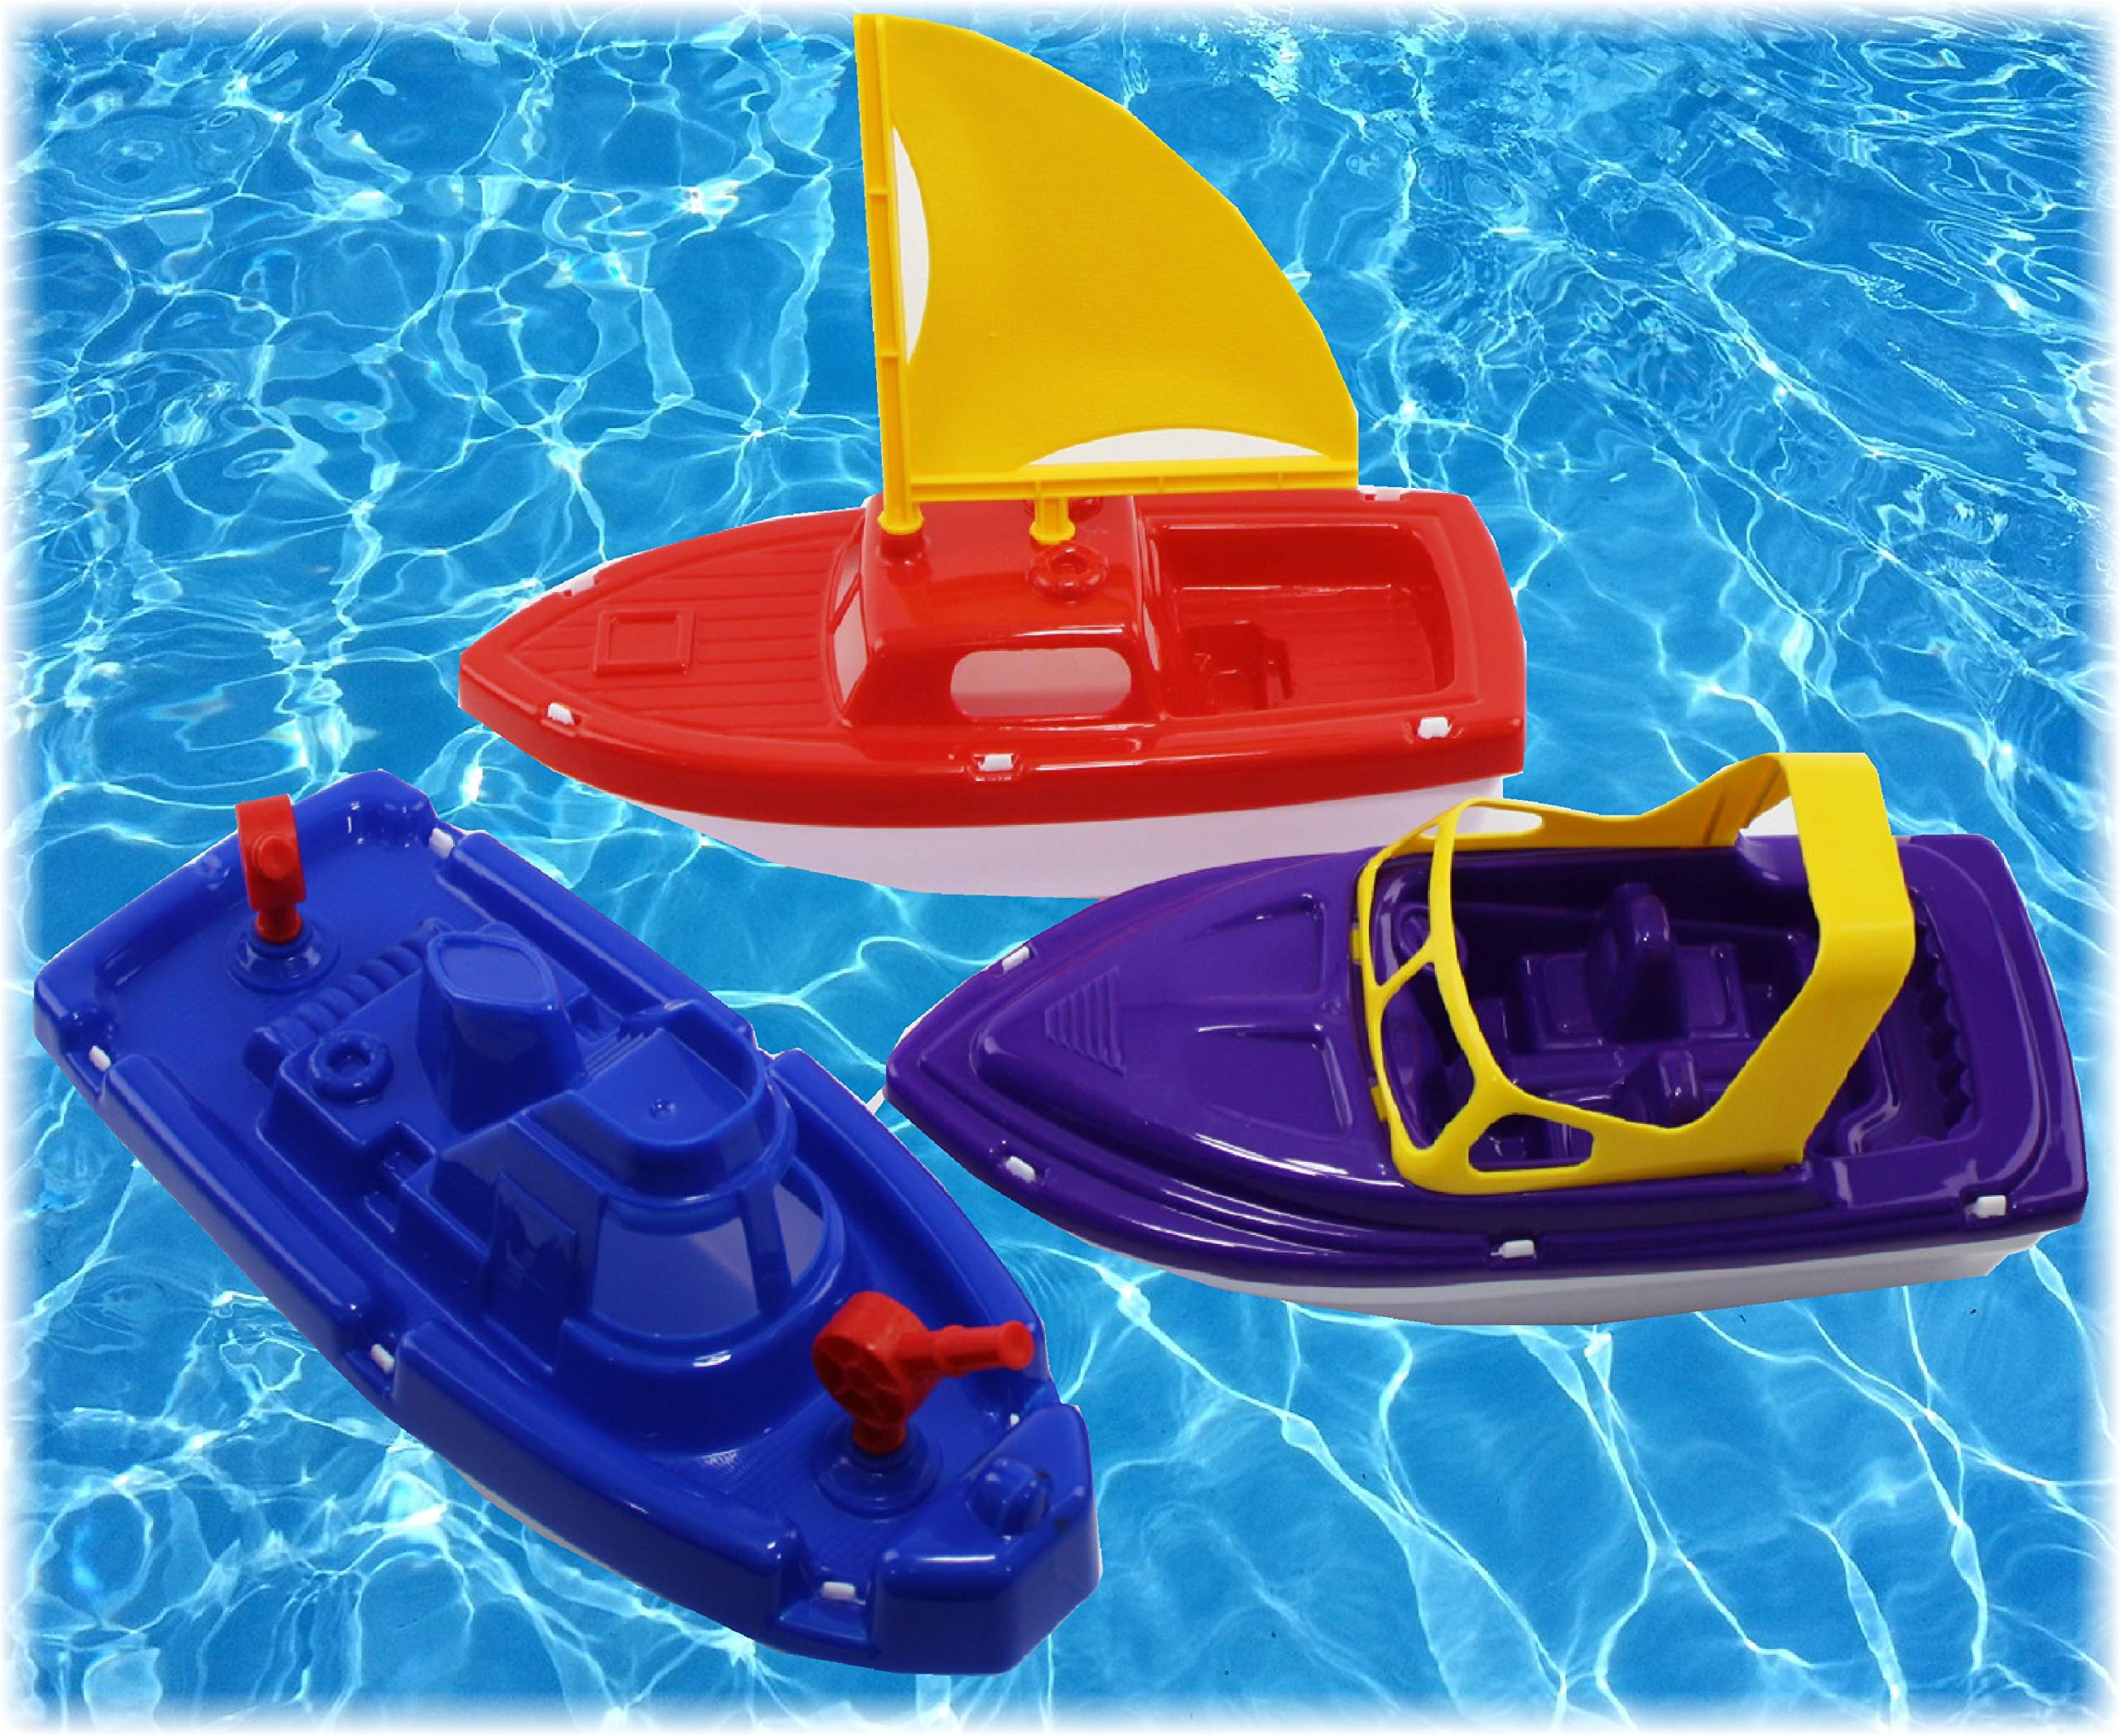 What Are Some Toys For Boating?